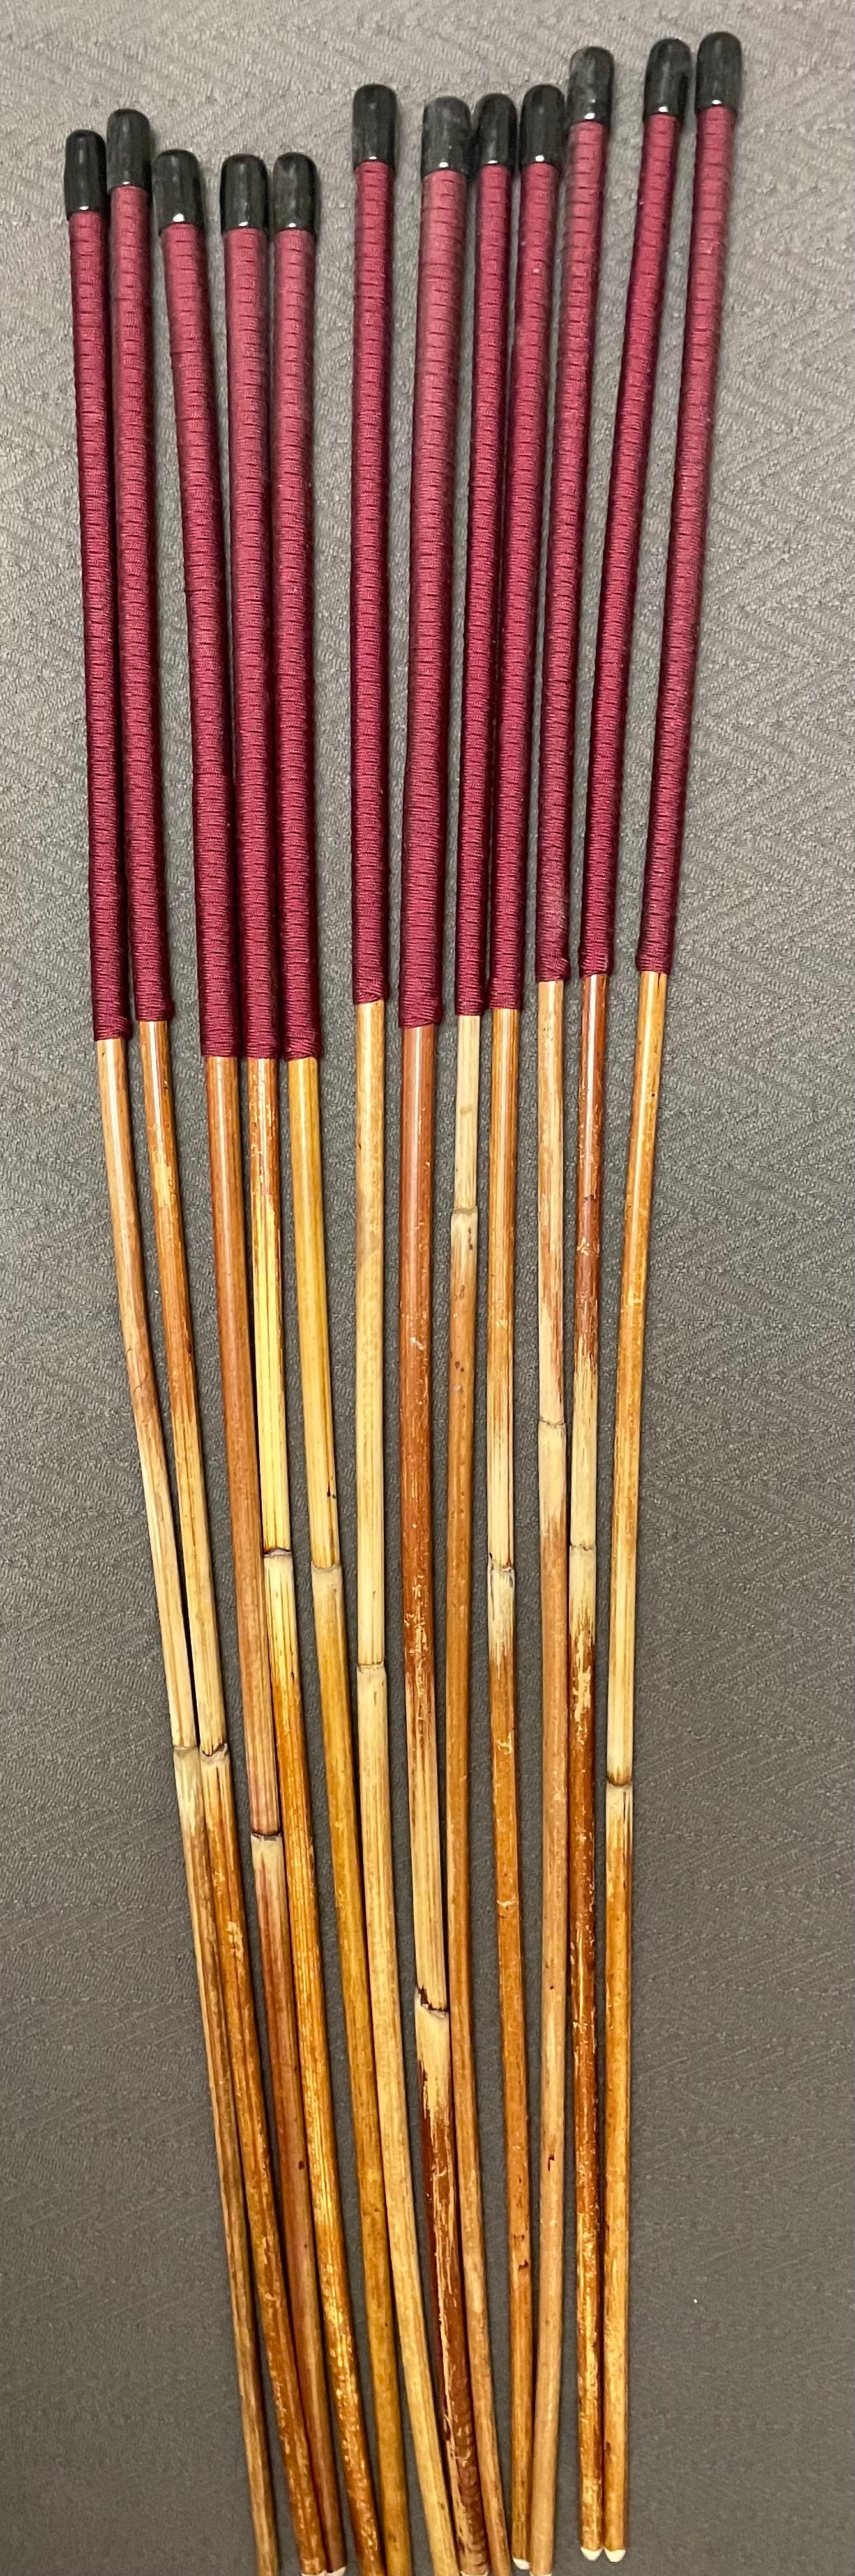 Set of 12 Classic Dragon Rattan Punishment Canes with Burgundy Paracord Handles - 95 to 100 cms Length - Sales Special